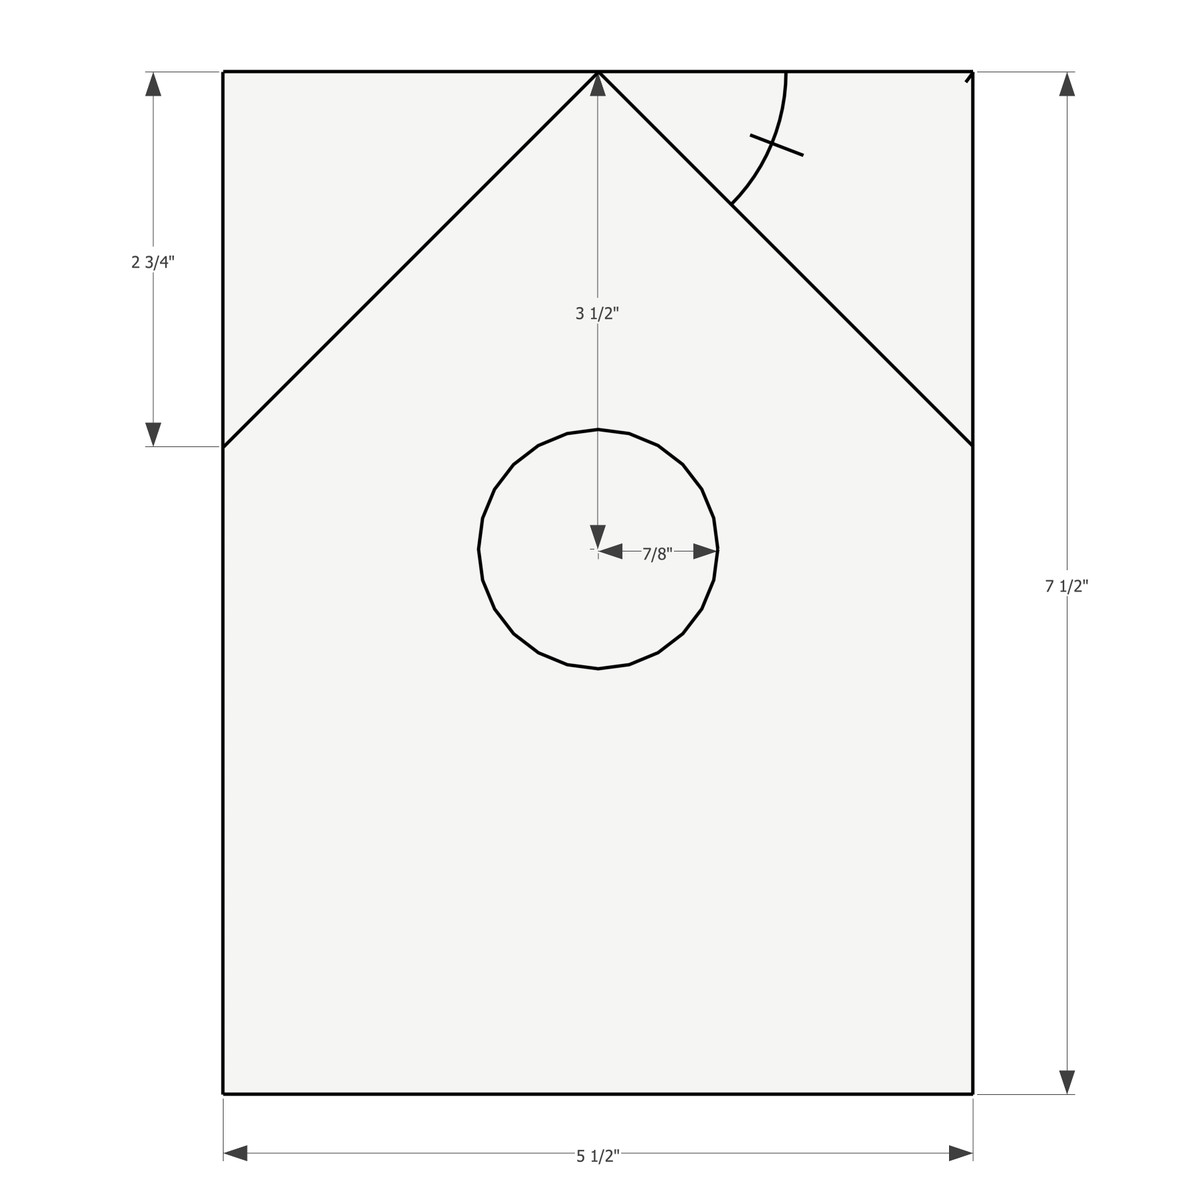 Cut list and dimensions for building a birdhouse